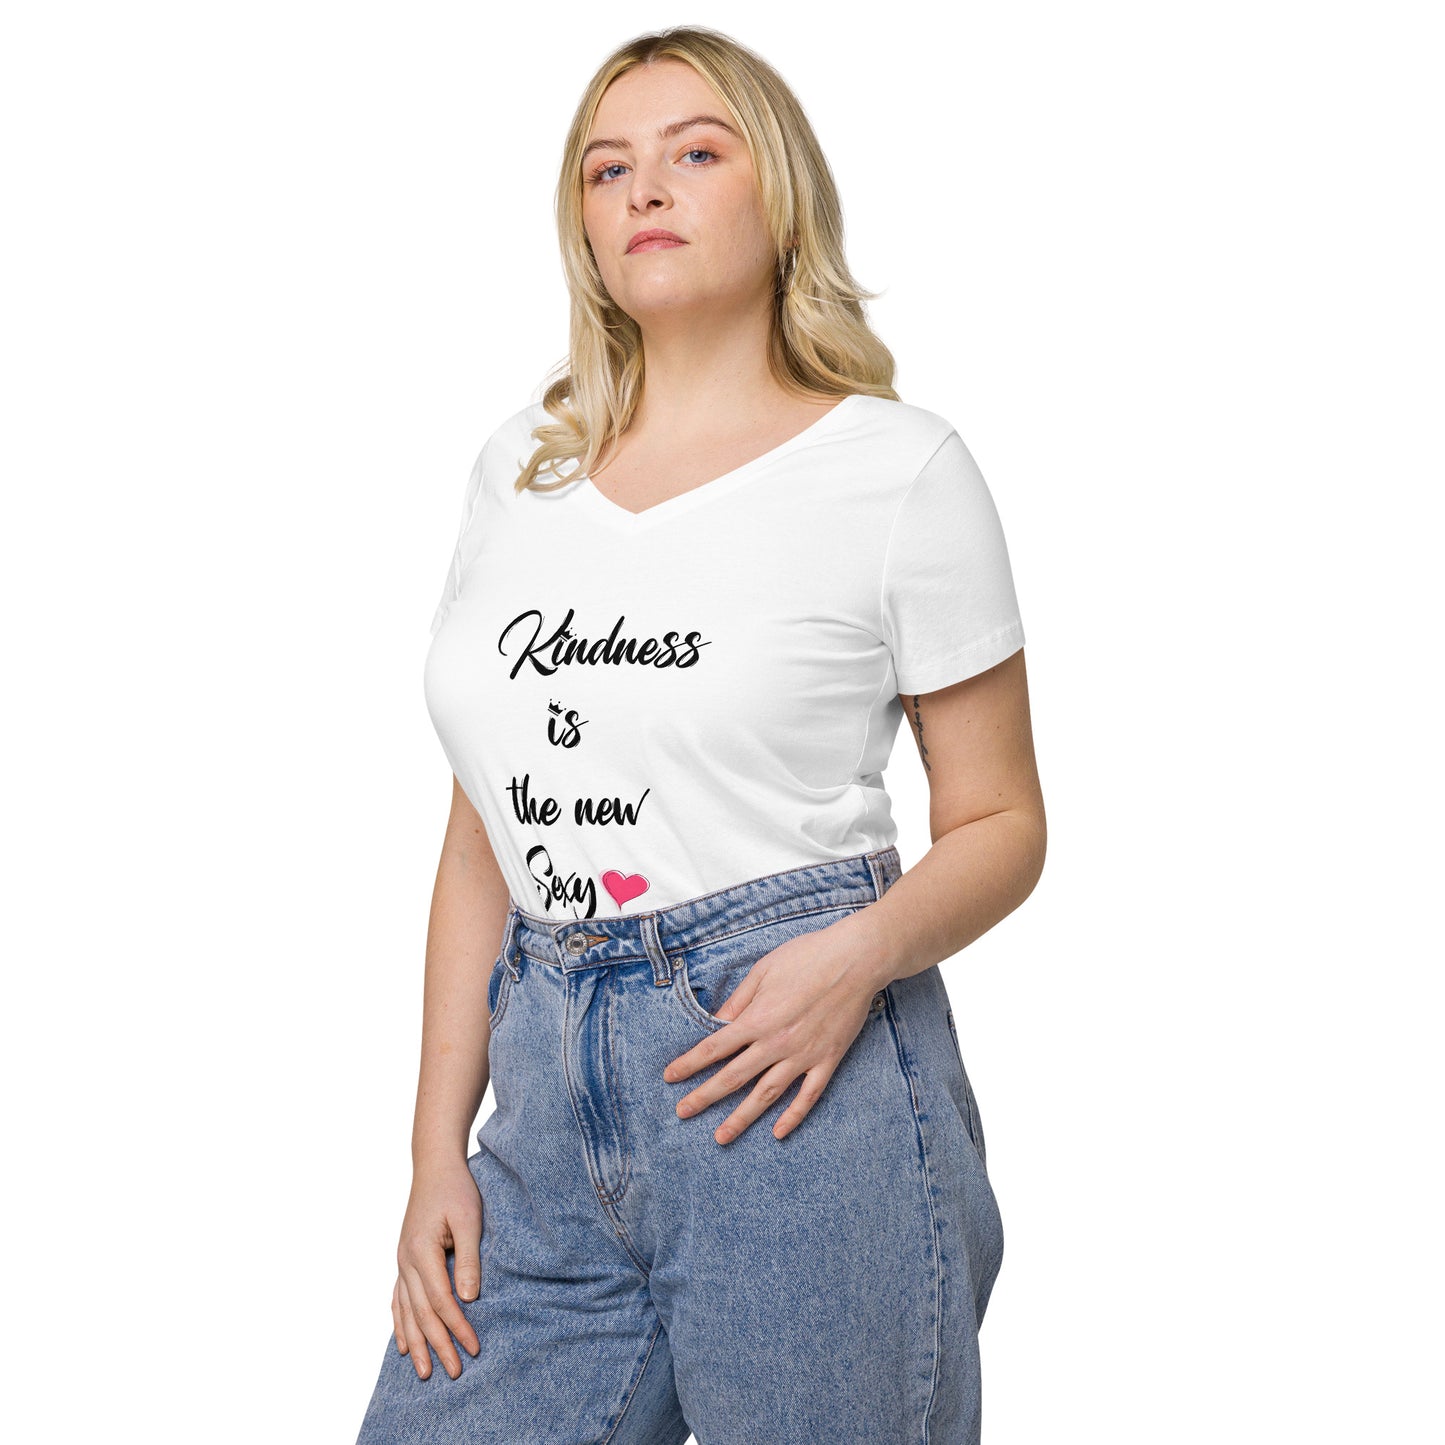 Kindness is the new sexy v-neck white t-shirt